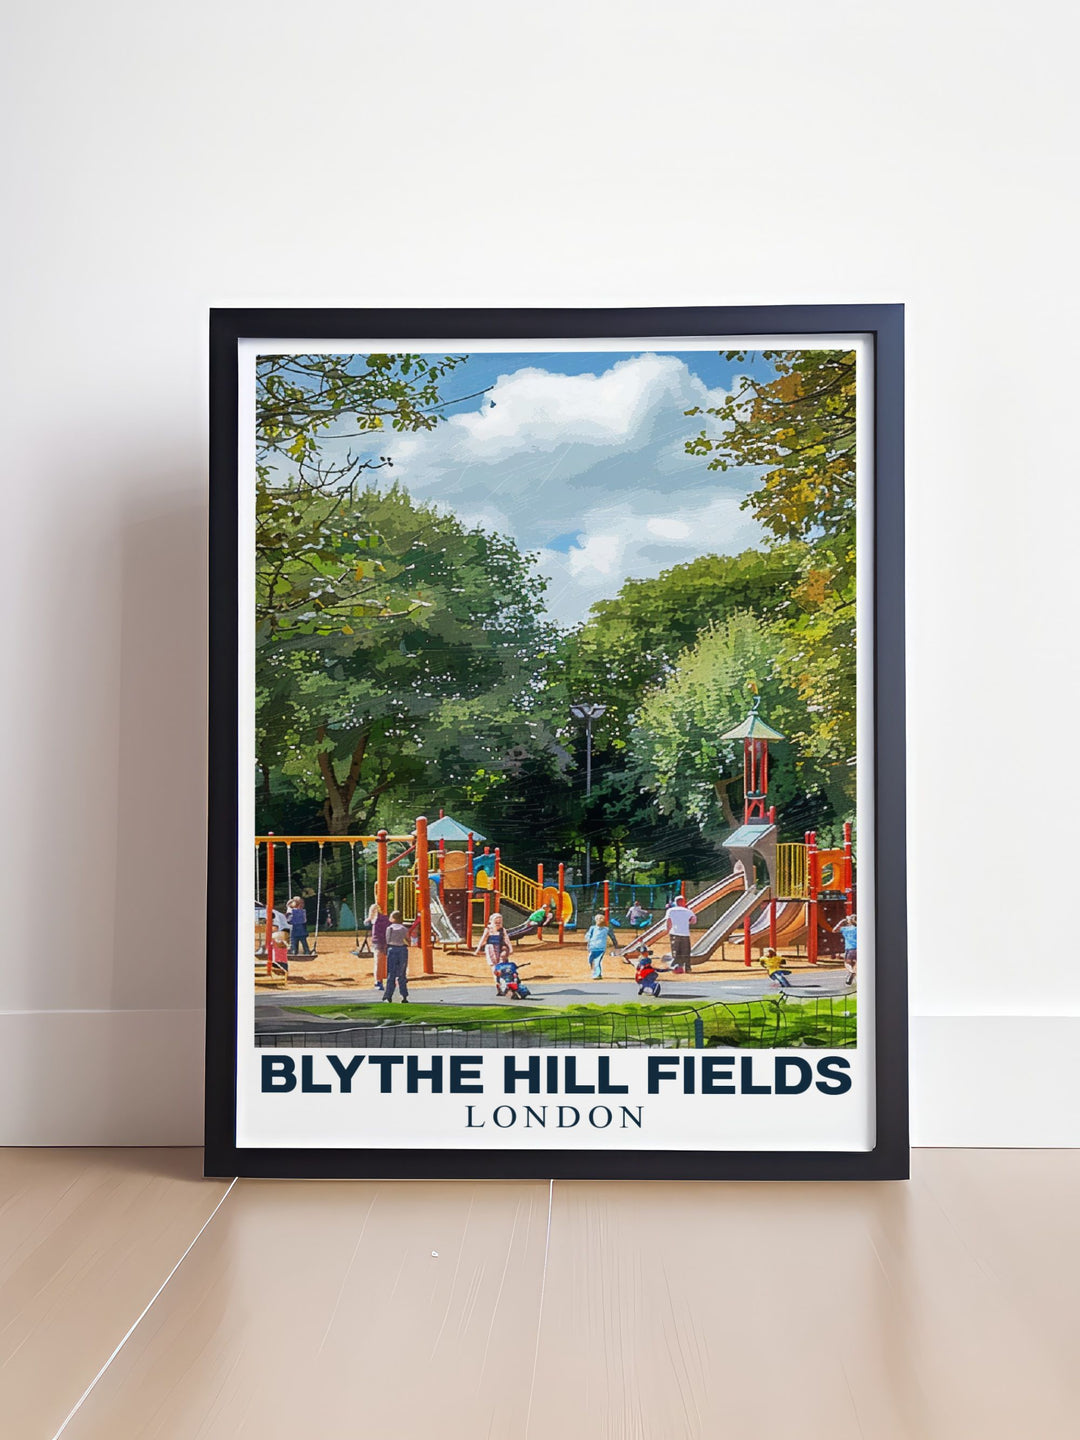 The charm of Blythe Hill Fields, with its blend of natural beauty and family friendly amenities, is brought to life in this poster, offering a piece of Londons park allure for your home.